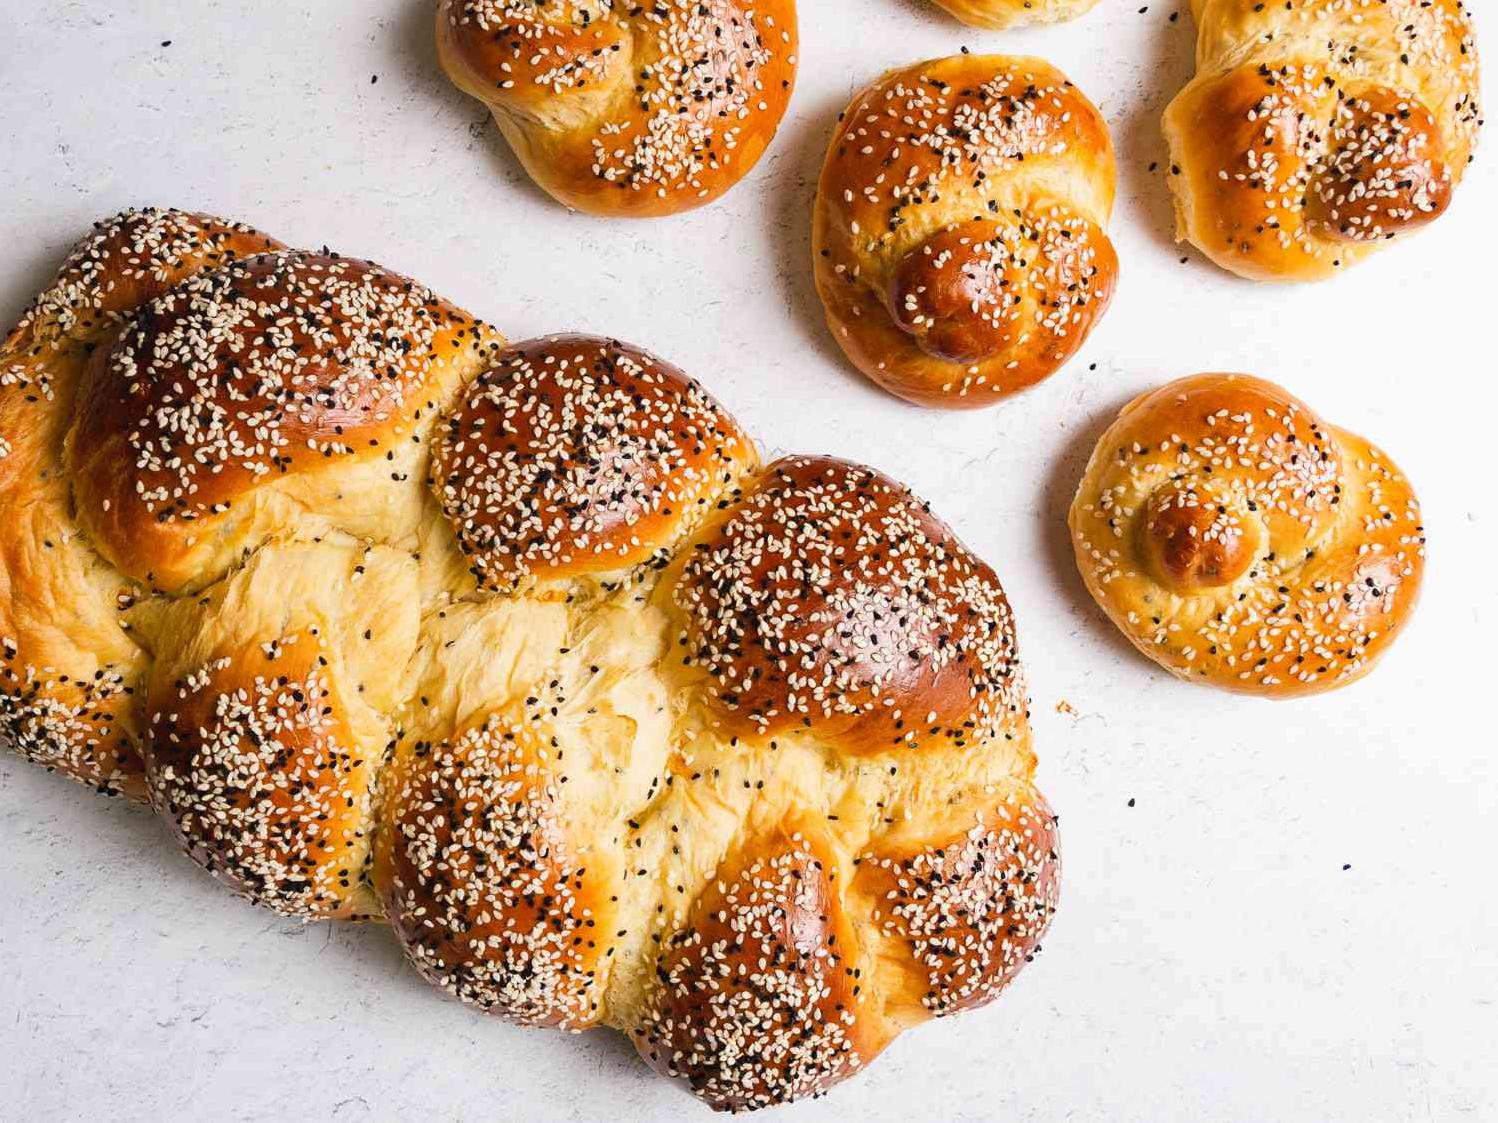  Warm, golden, and inviting - Armenian Easter bread fresh out of the oven!